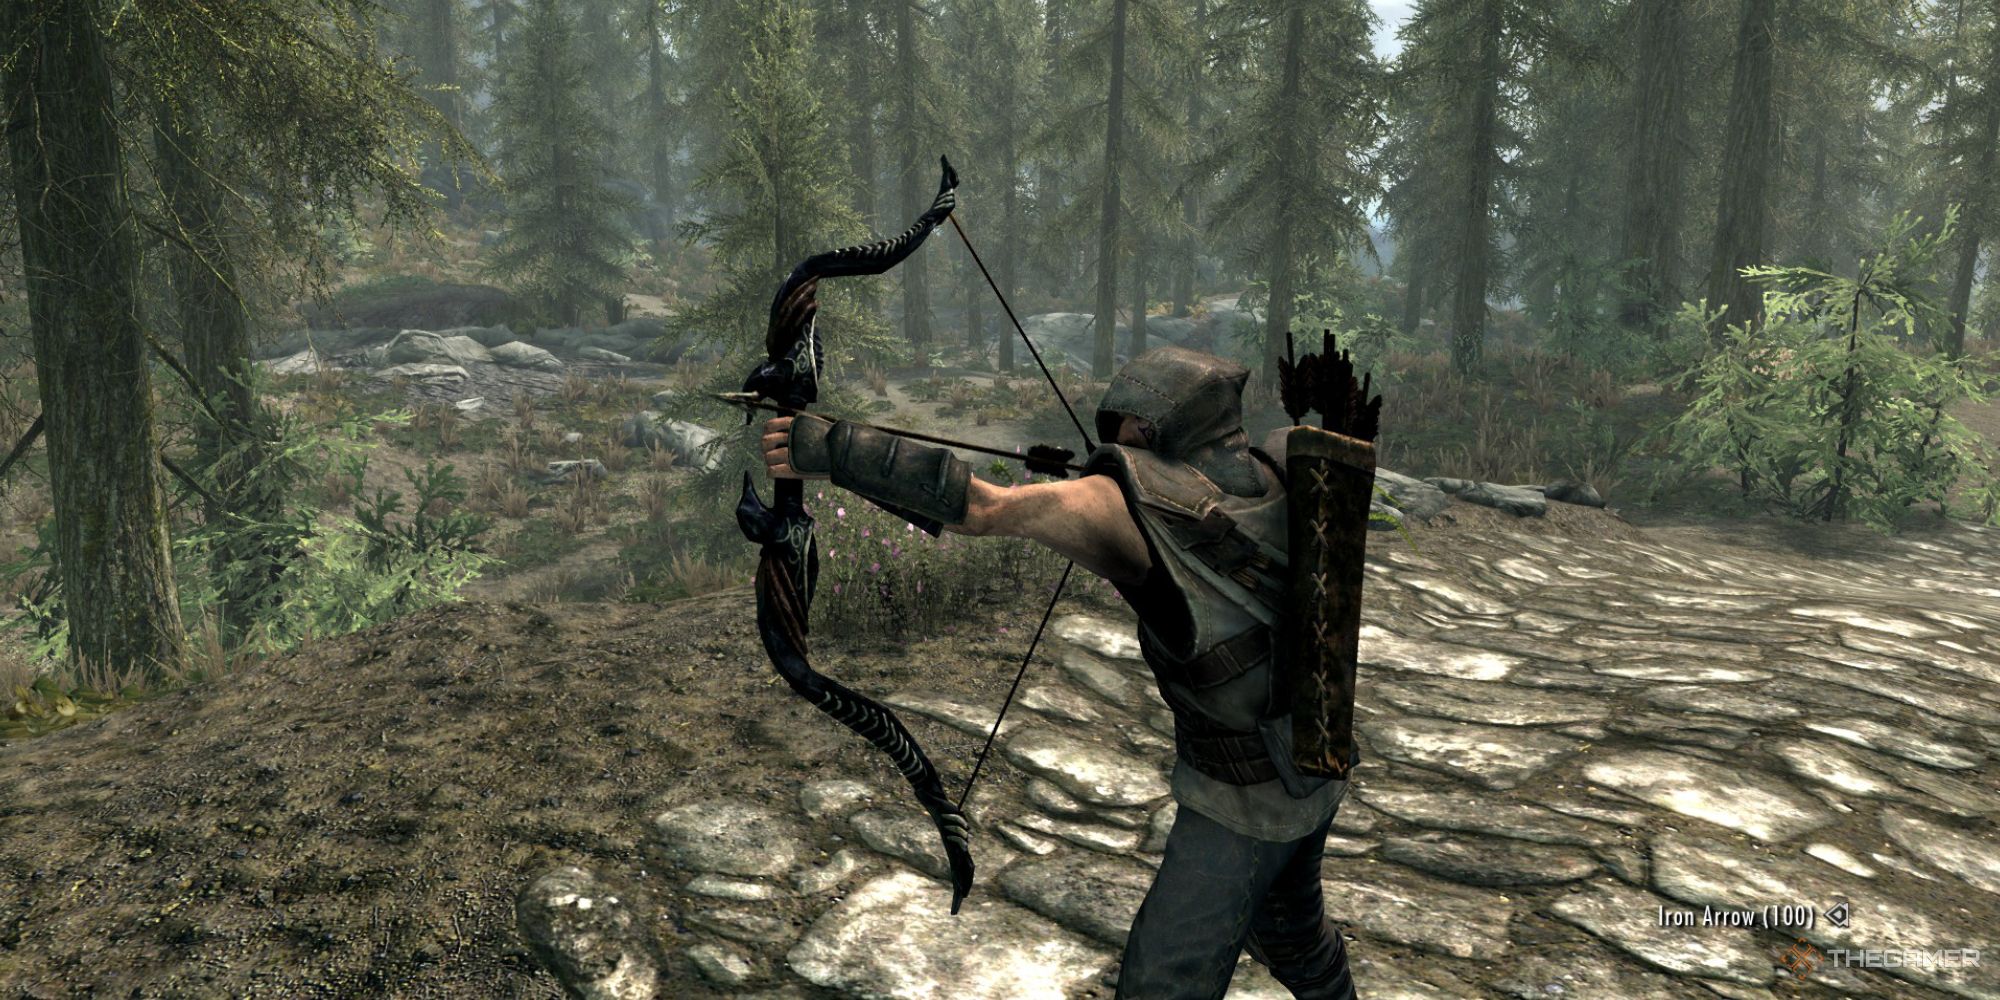 The Player Holding an Ebony Bow in Skyrim